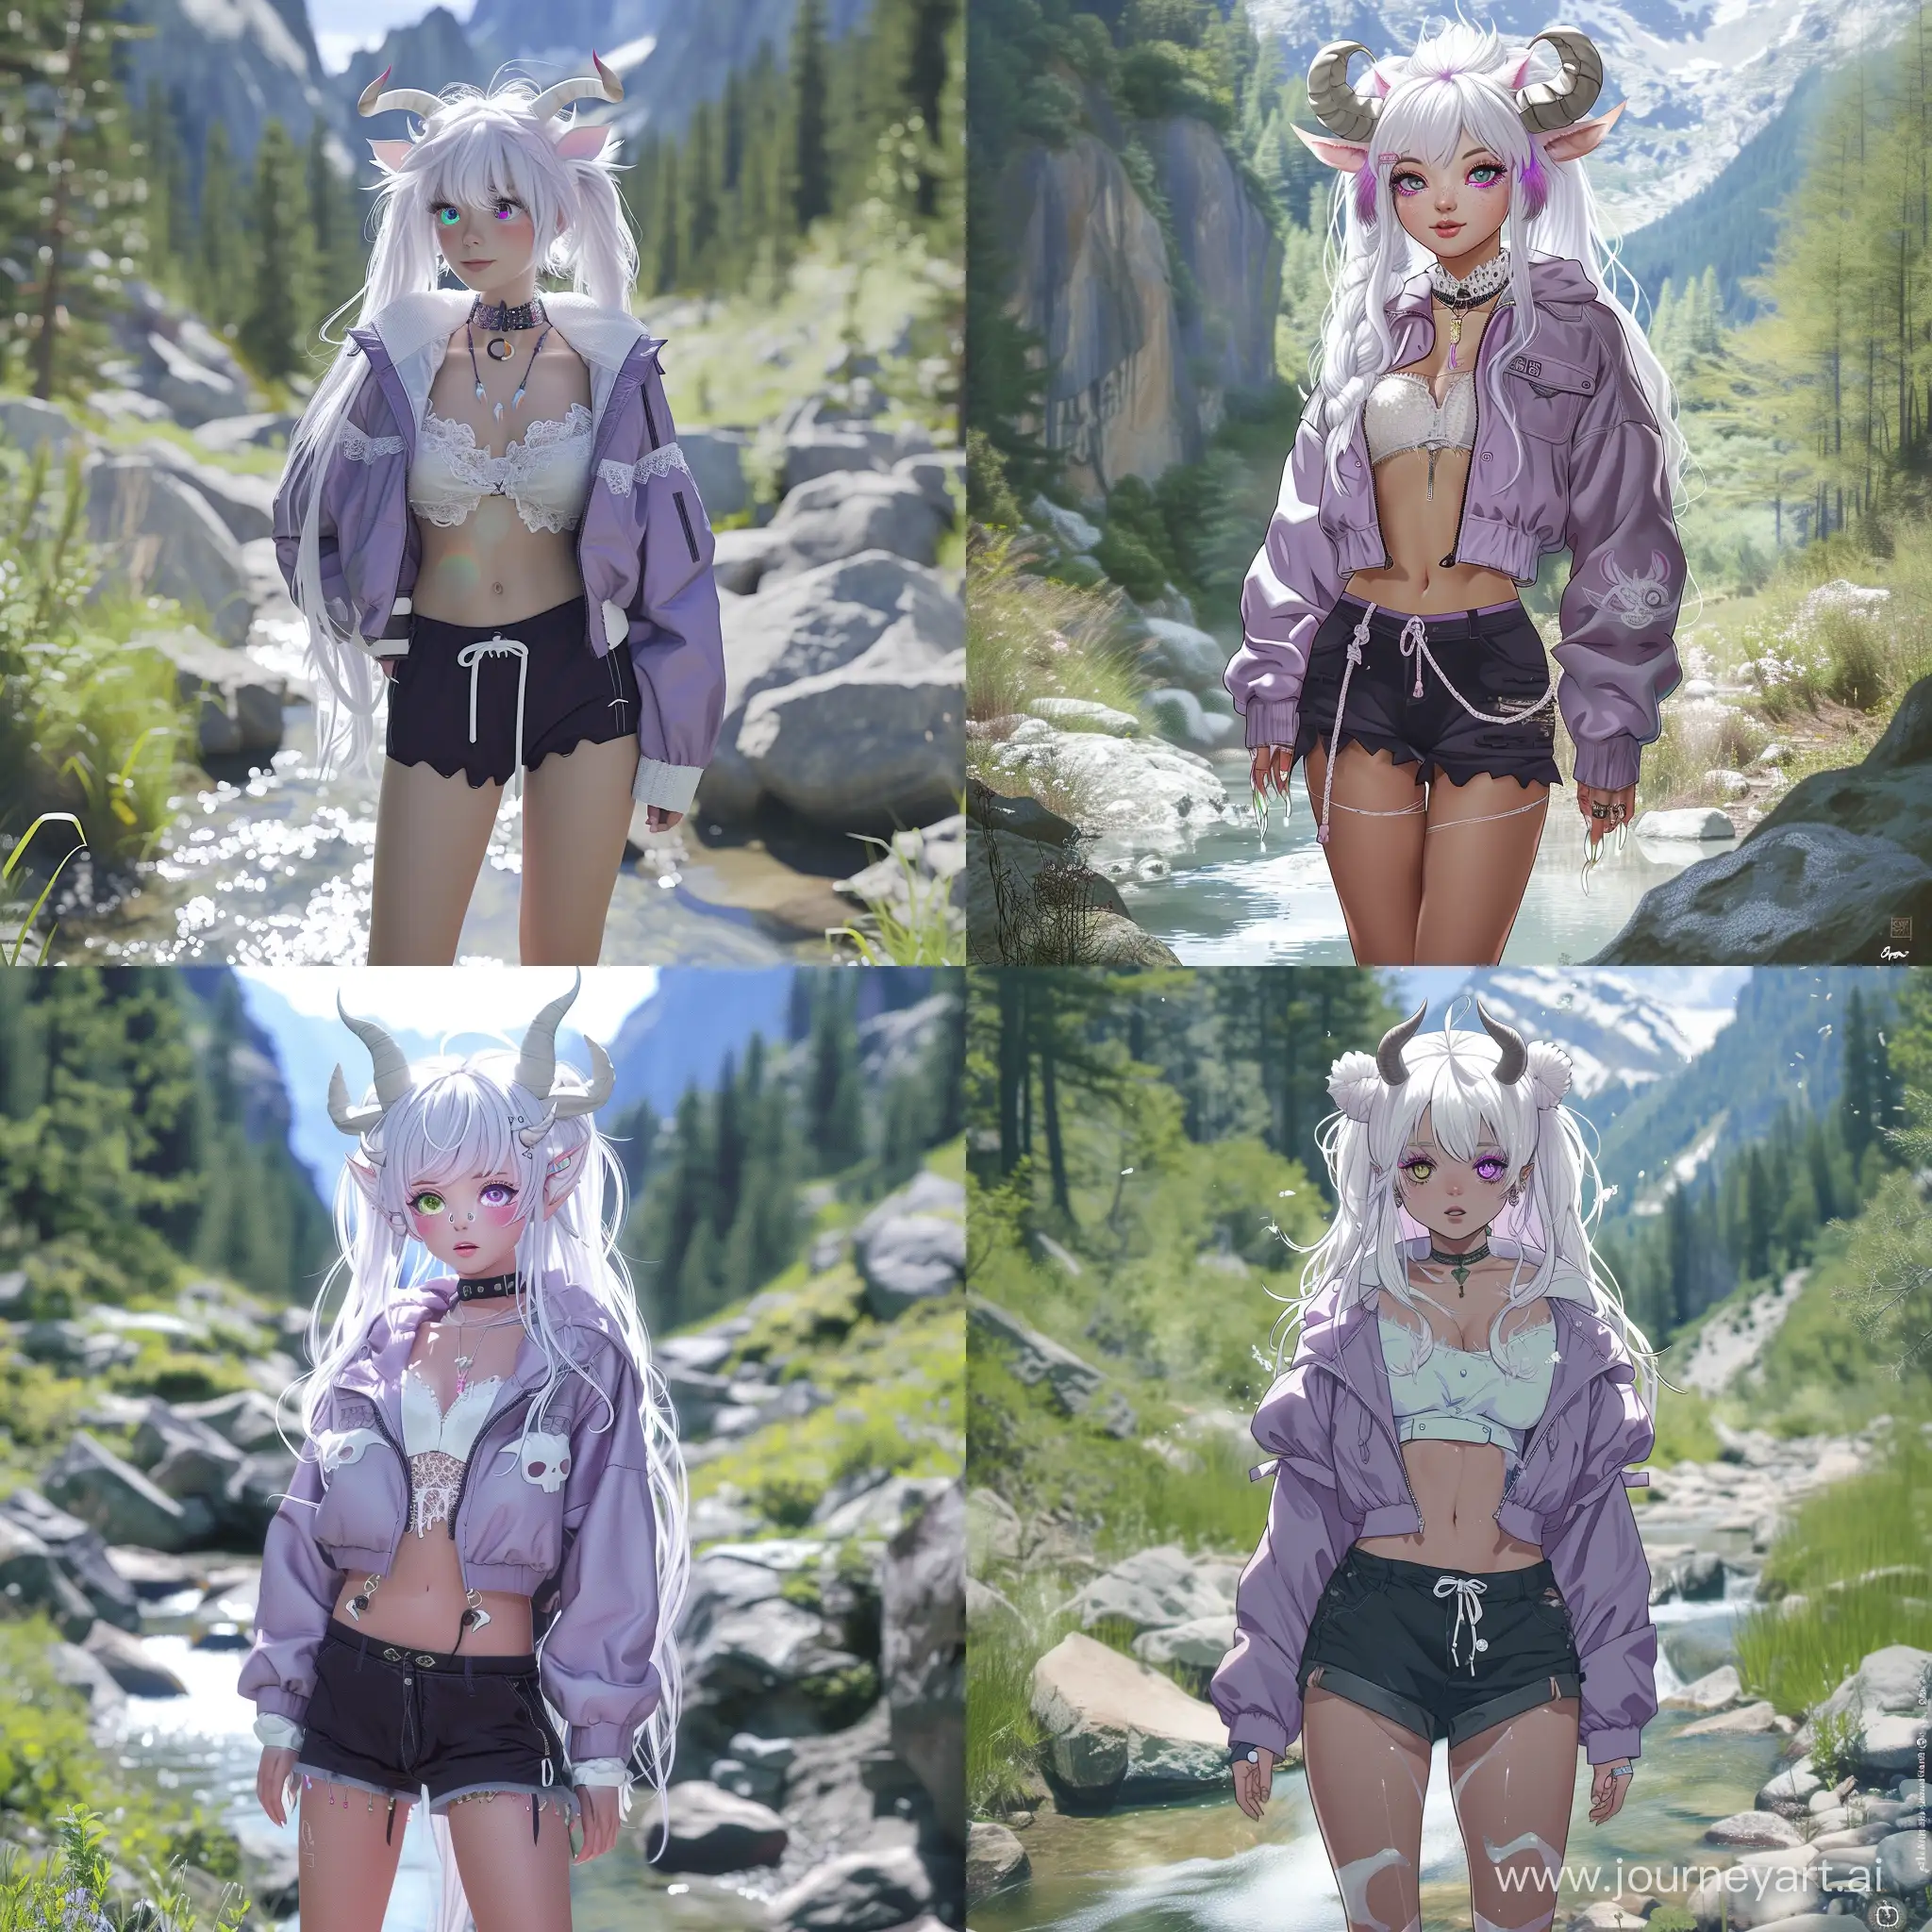 1 girl, (pale skin:0.7), white hair, ((long hair)), 2 hair buns, light lilac eyes, horns, colored eyelashes, white eyelashes, perfect body, lilac jacket, dark shorts, lilac esthetic, all lilac, white details, beautiful clothing decoration, outdoors, mountains, forest, sunny weather, small stream, rocks, stones